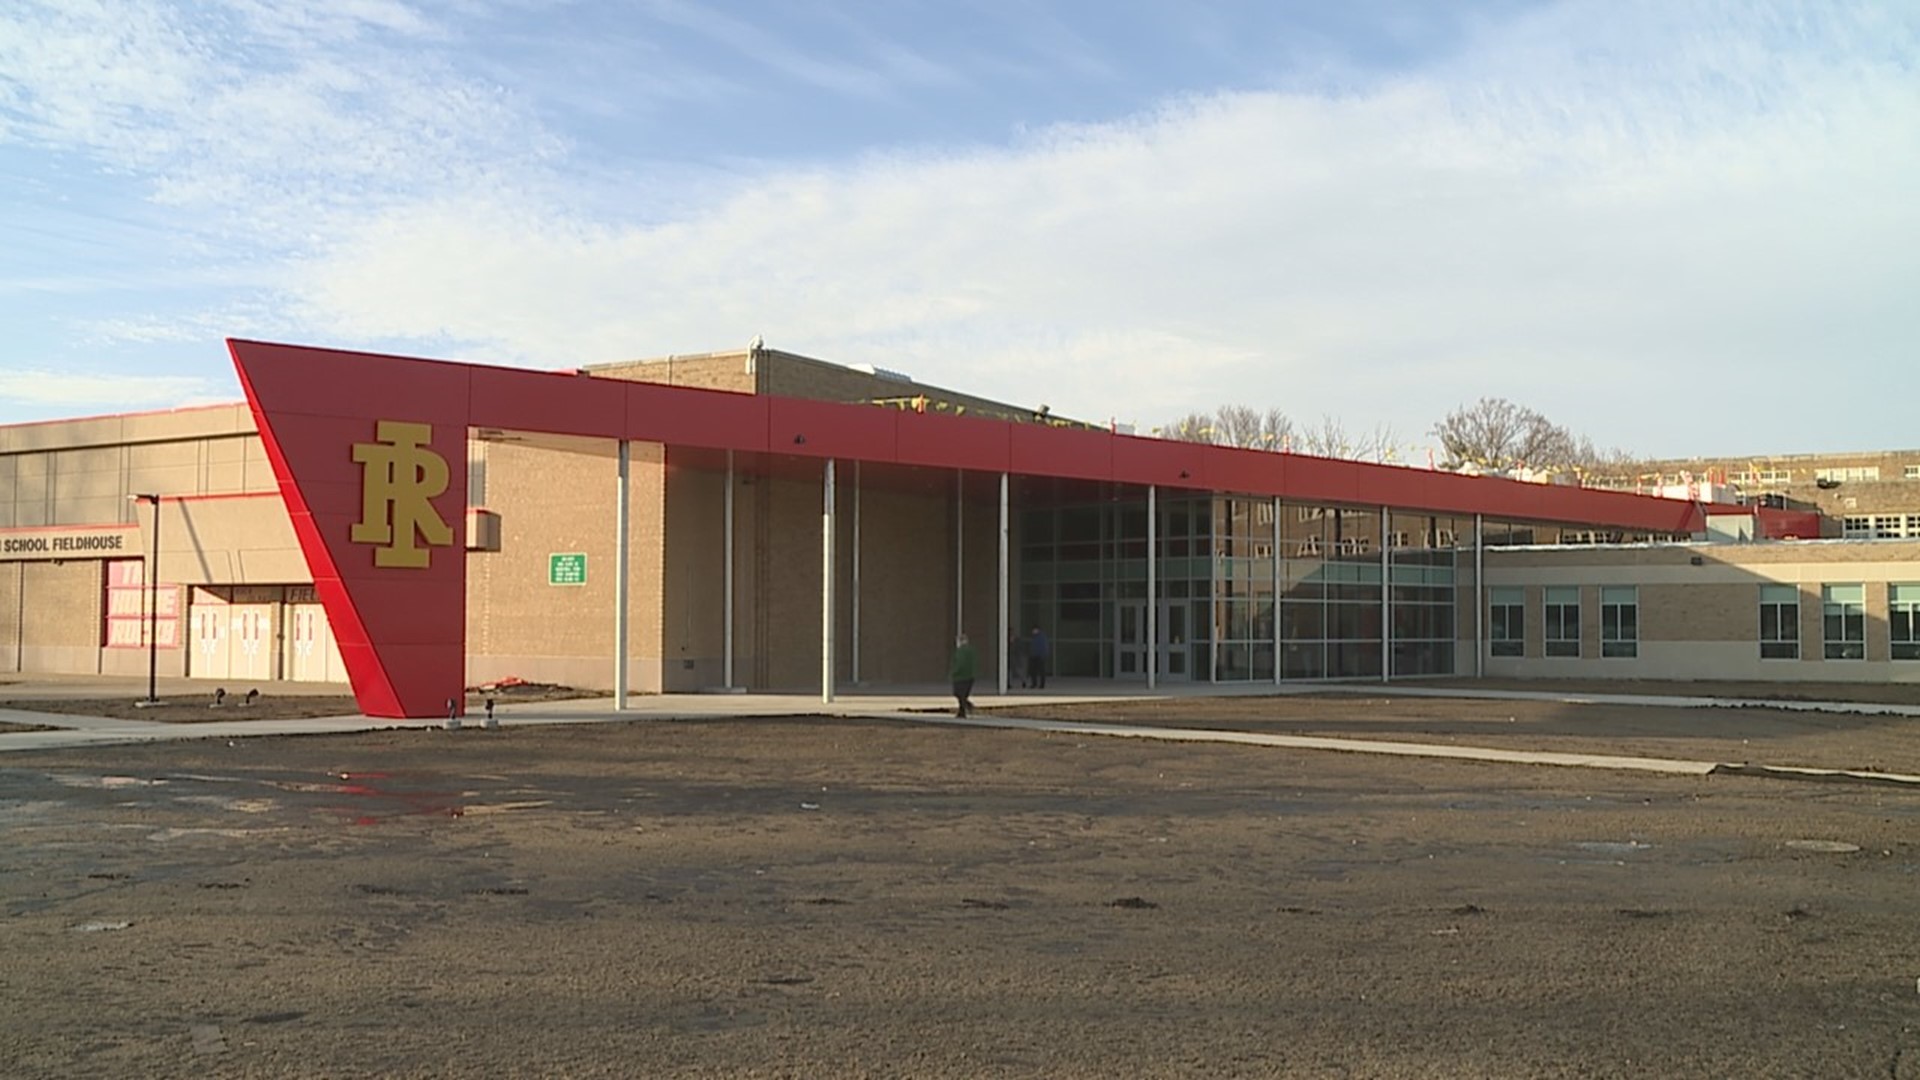 Rock Island High School and officials cut a ribbon Monday afternoon to celebrate the completion of the multi-million dollar renovation project.